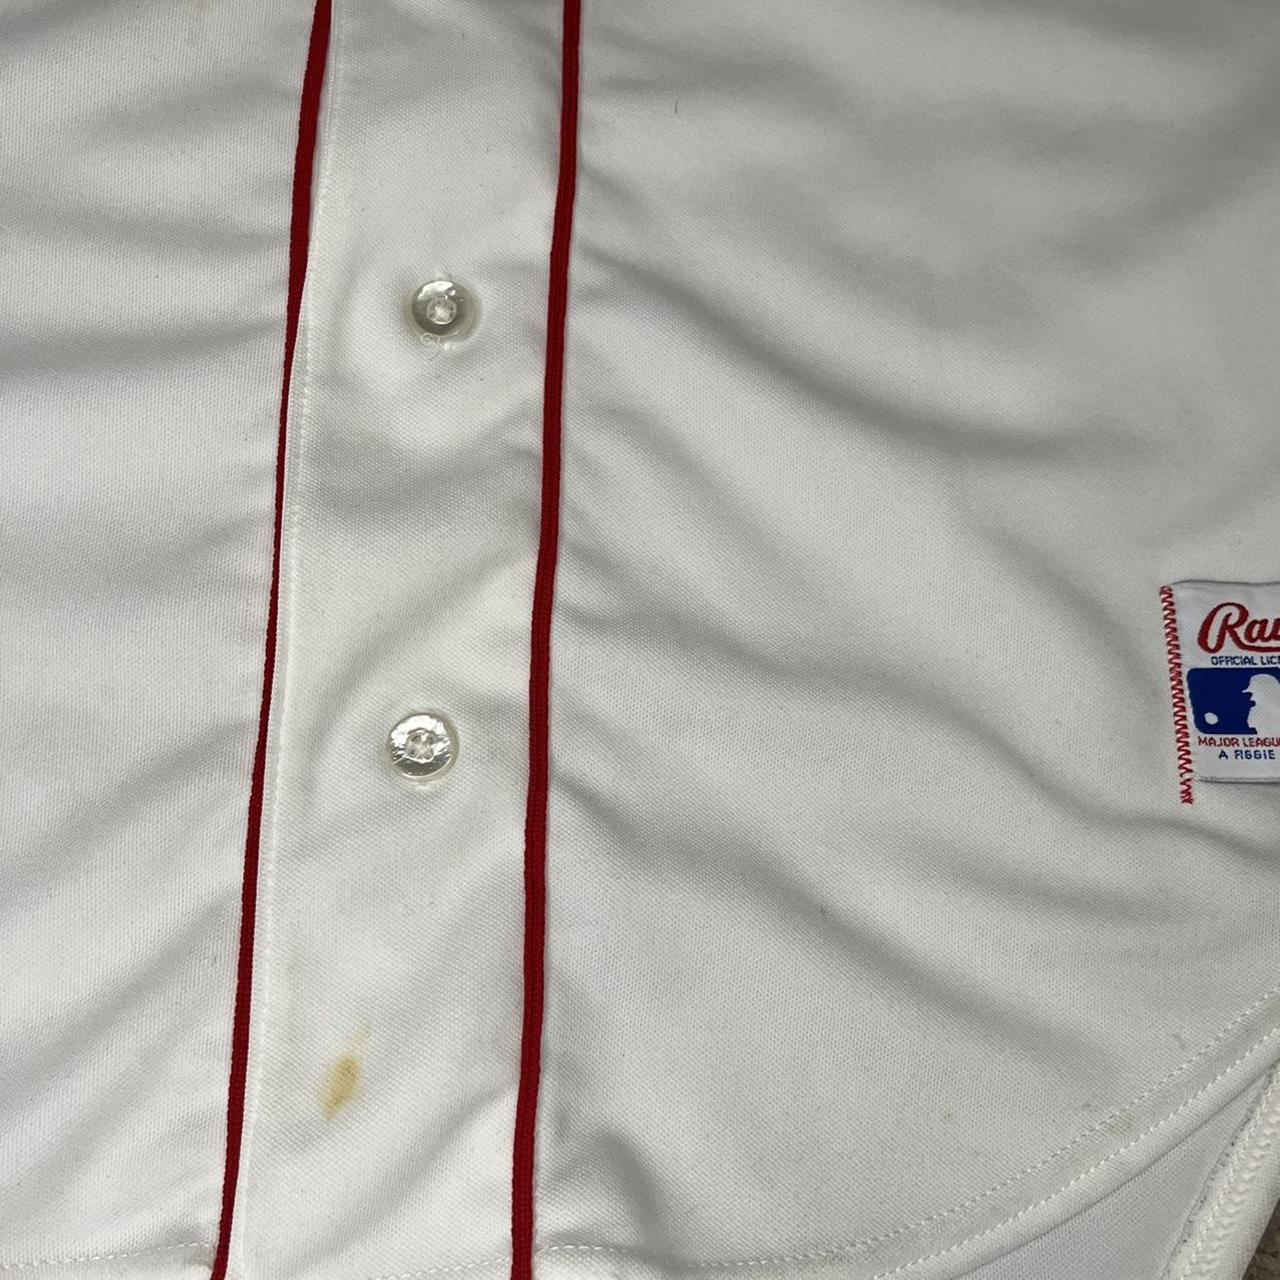 Vintage Pawtucket Red Sox giveaway jersey. The - Depop